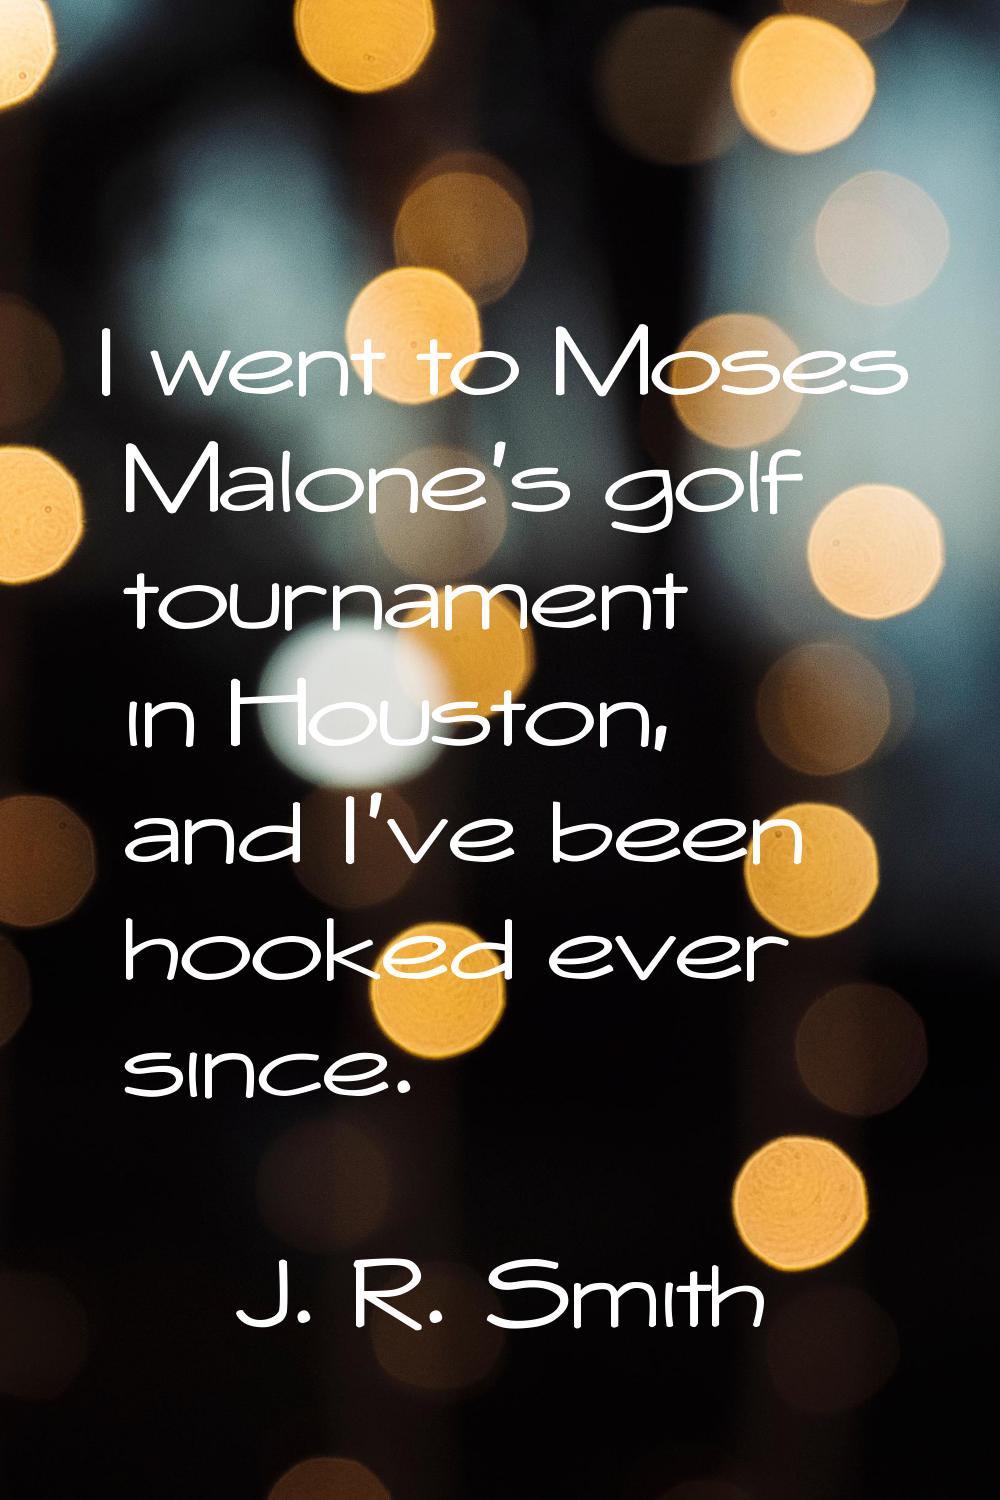 I went to Moses Malone's golf tournament in Houston, and I've been hooked ever since.